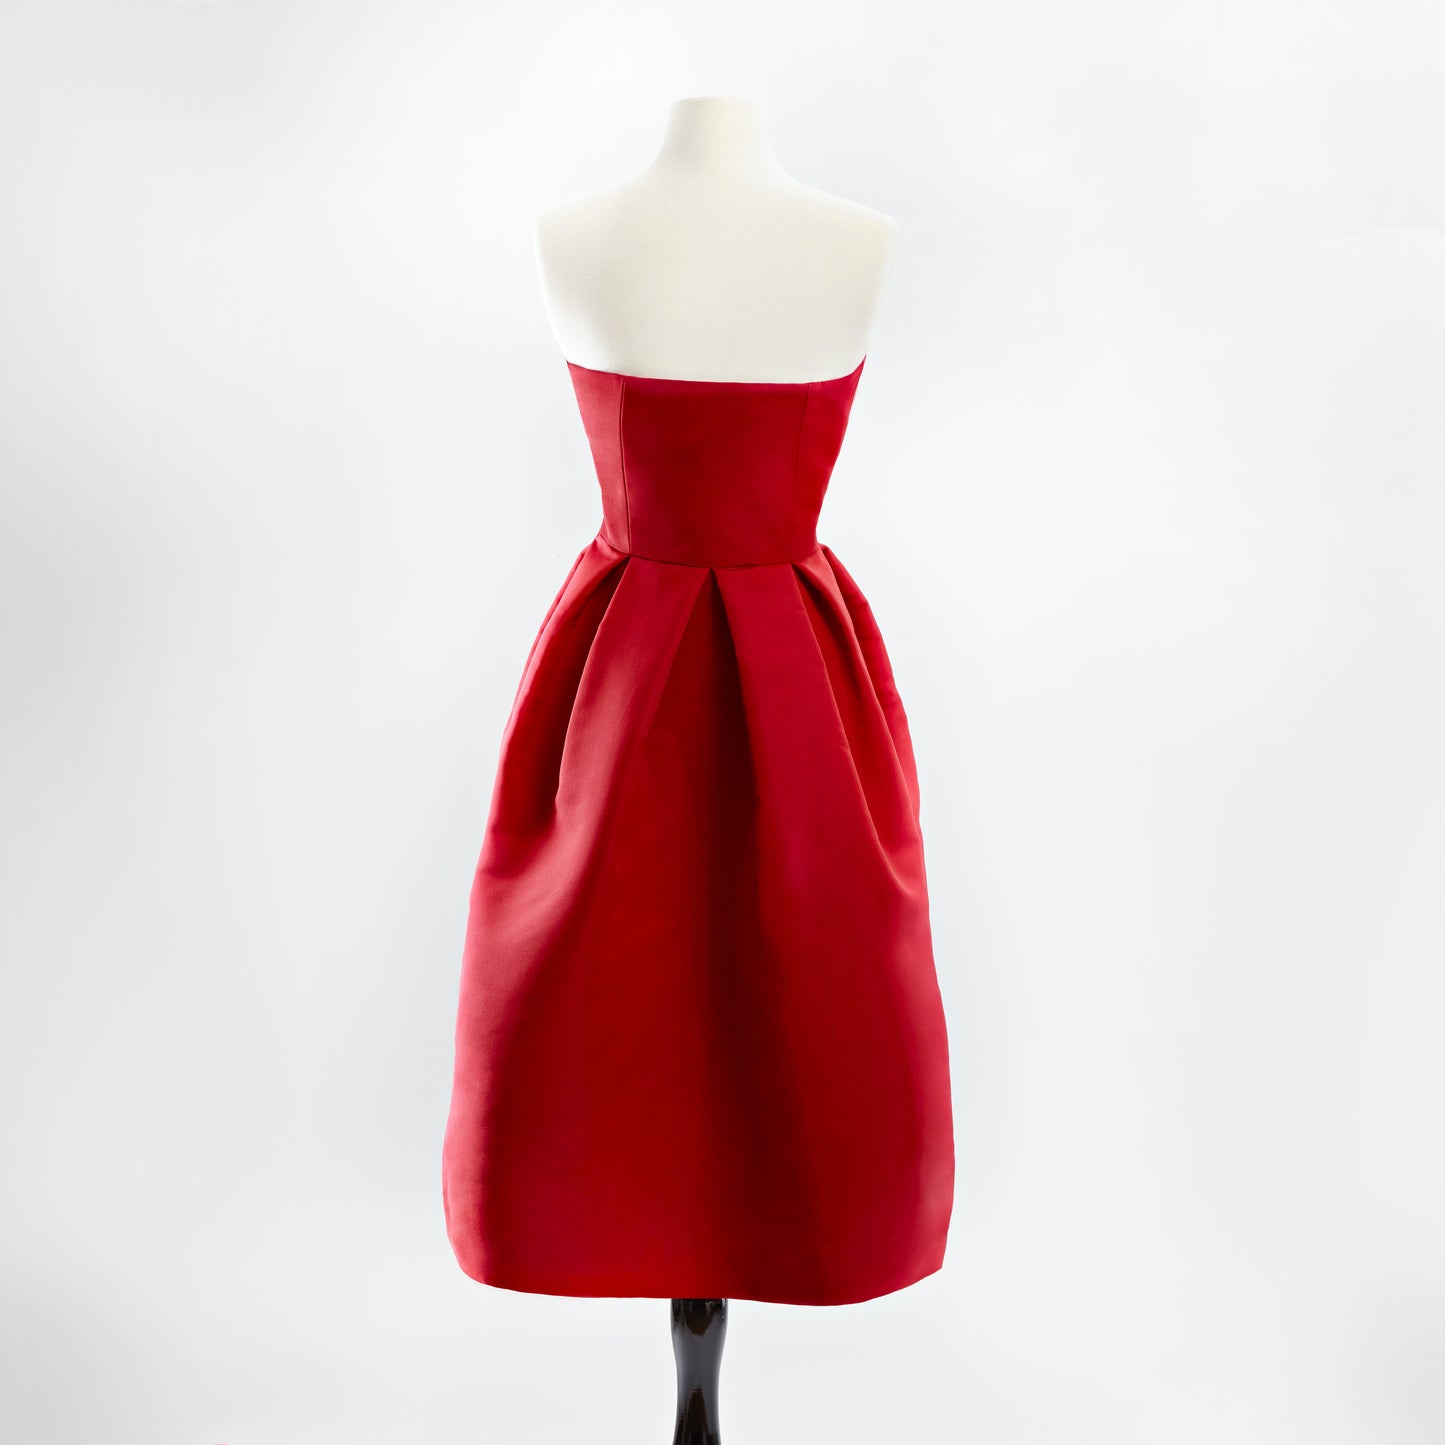 Lily Dress in Lipstick Red